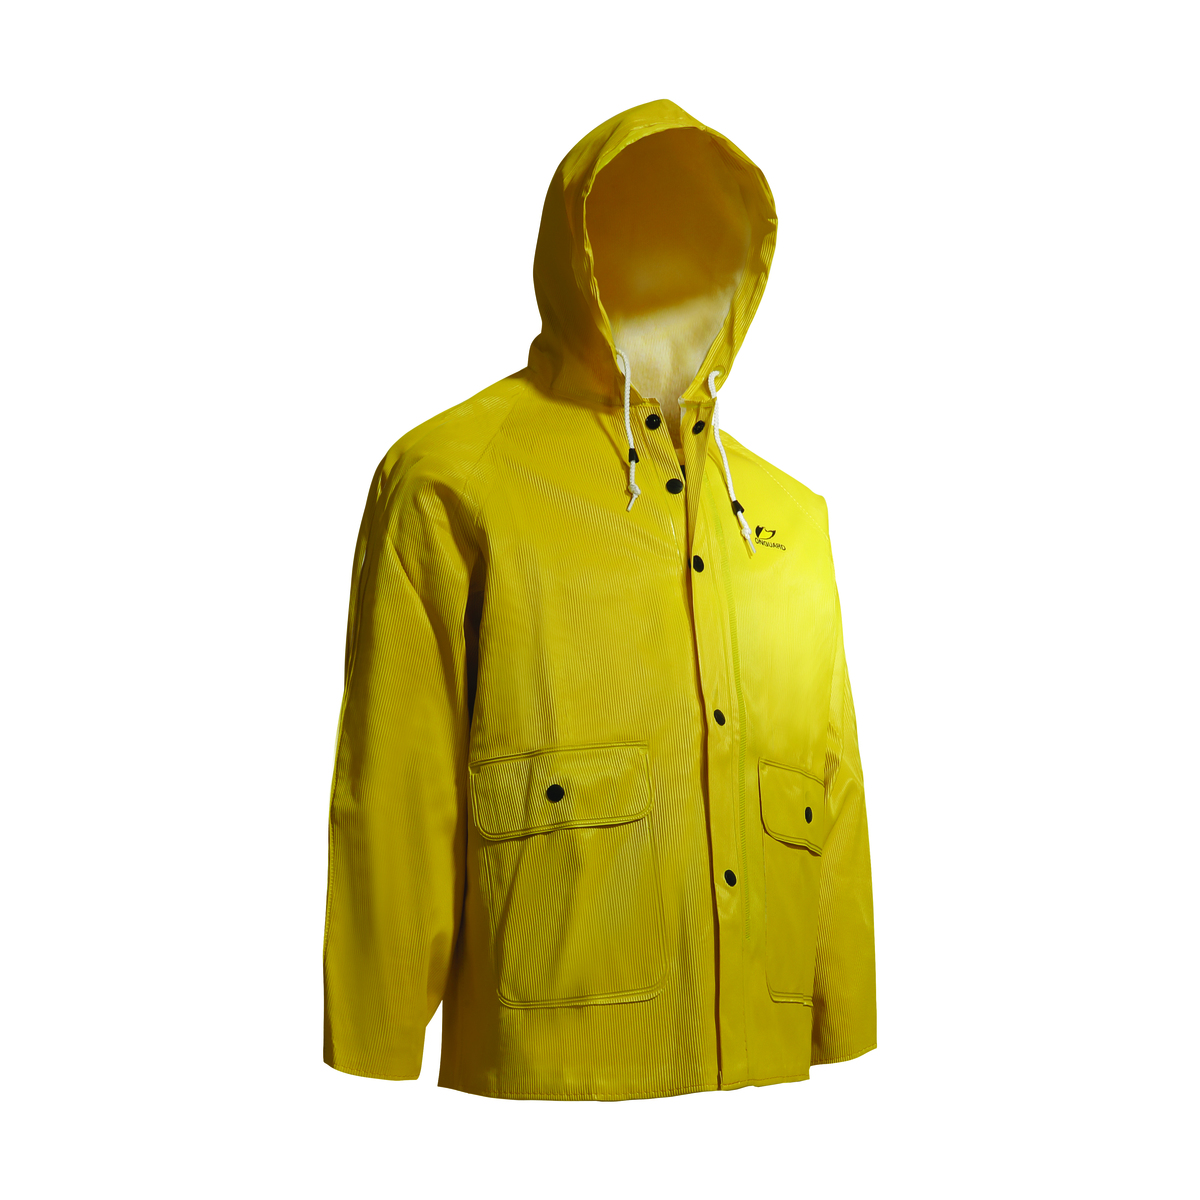 Dunlop® Protective Footwear 2X Yellow Webtex .65 mm Polyester/PVC Rain Jacket With Attached Hood